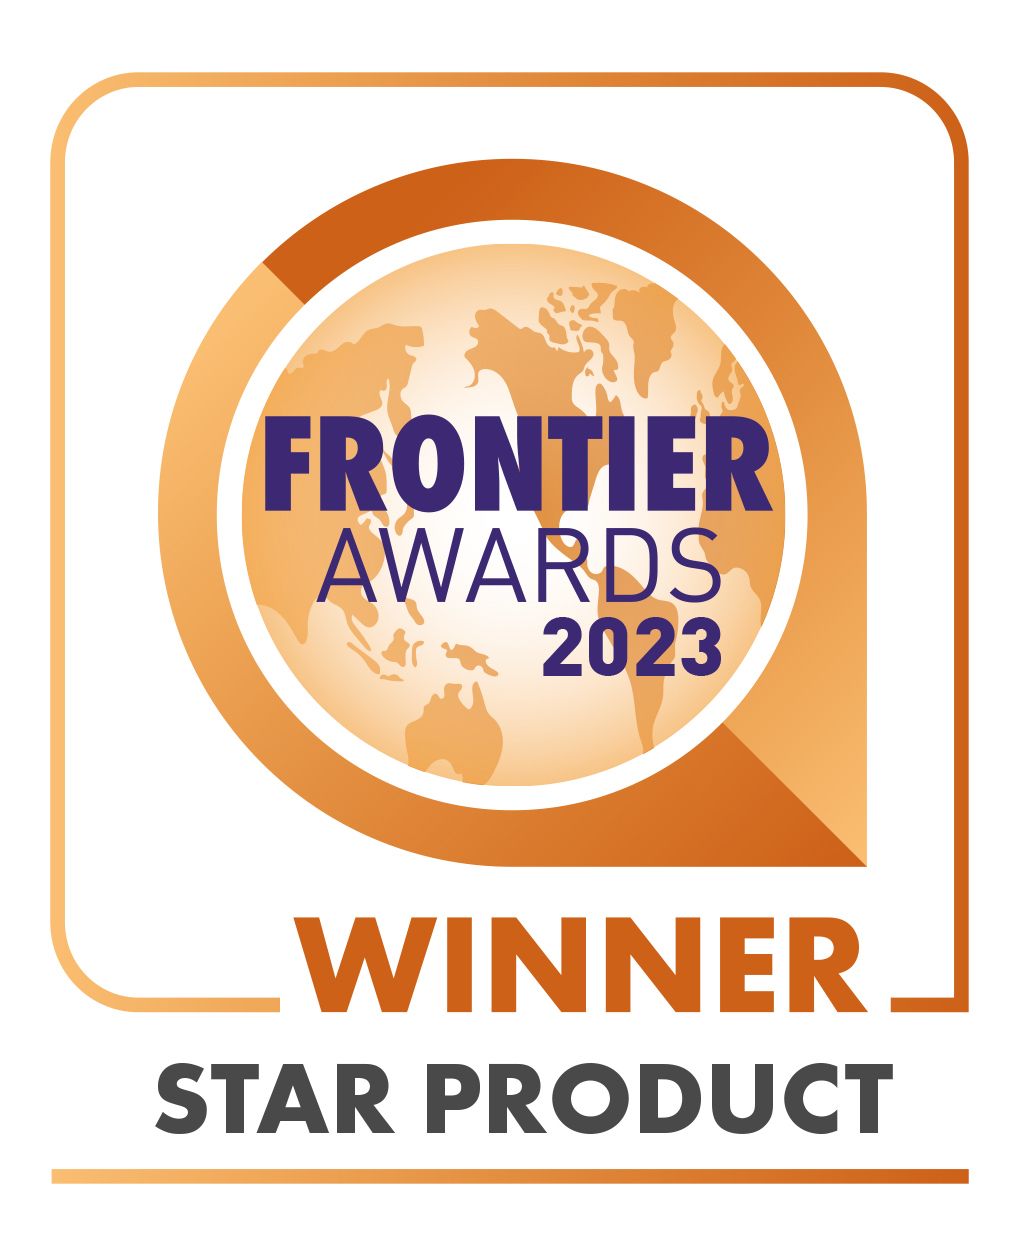 COTI Vision®: WINS PRESTIGIOUS FRONTIER AWARD   STAR JEWELLERY, WATCHES, FASHION &  ACCESSORIES PRODUCT OF THE YEAR!